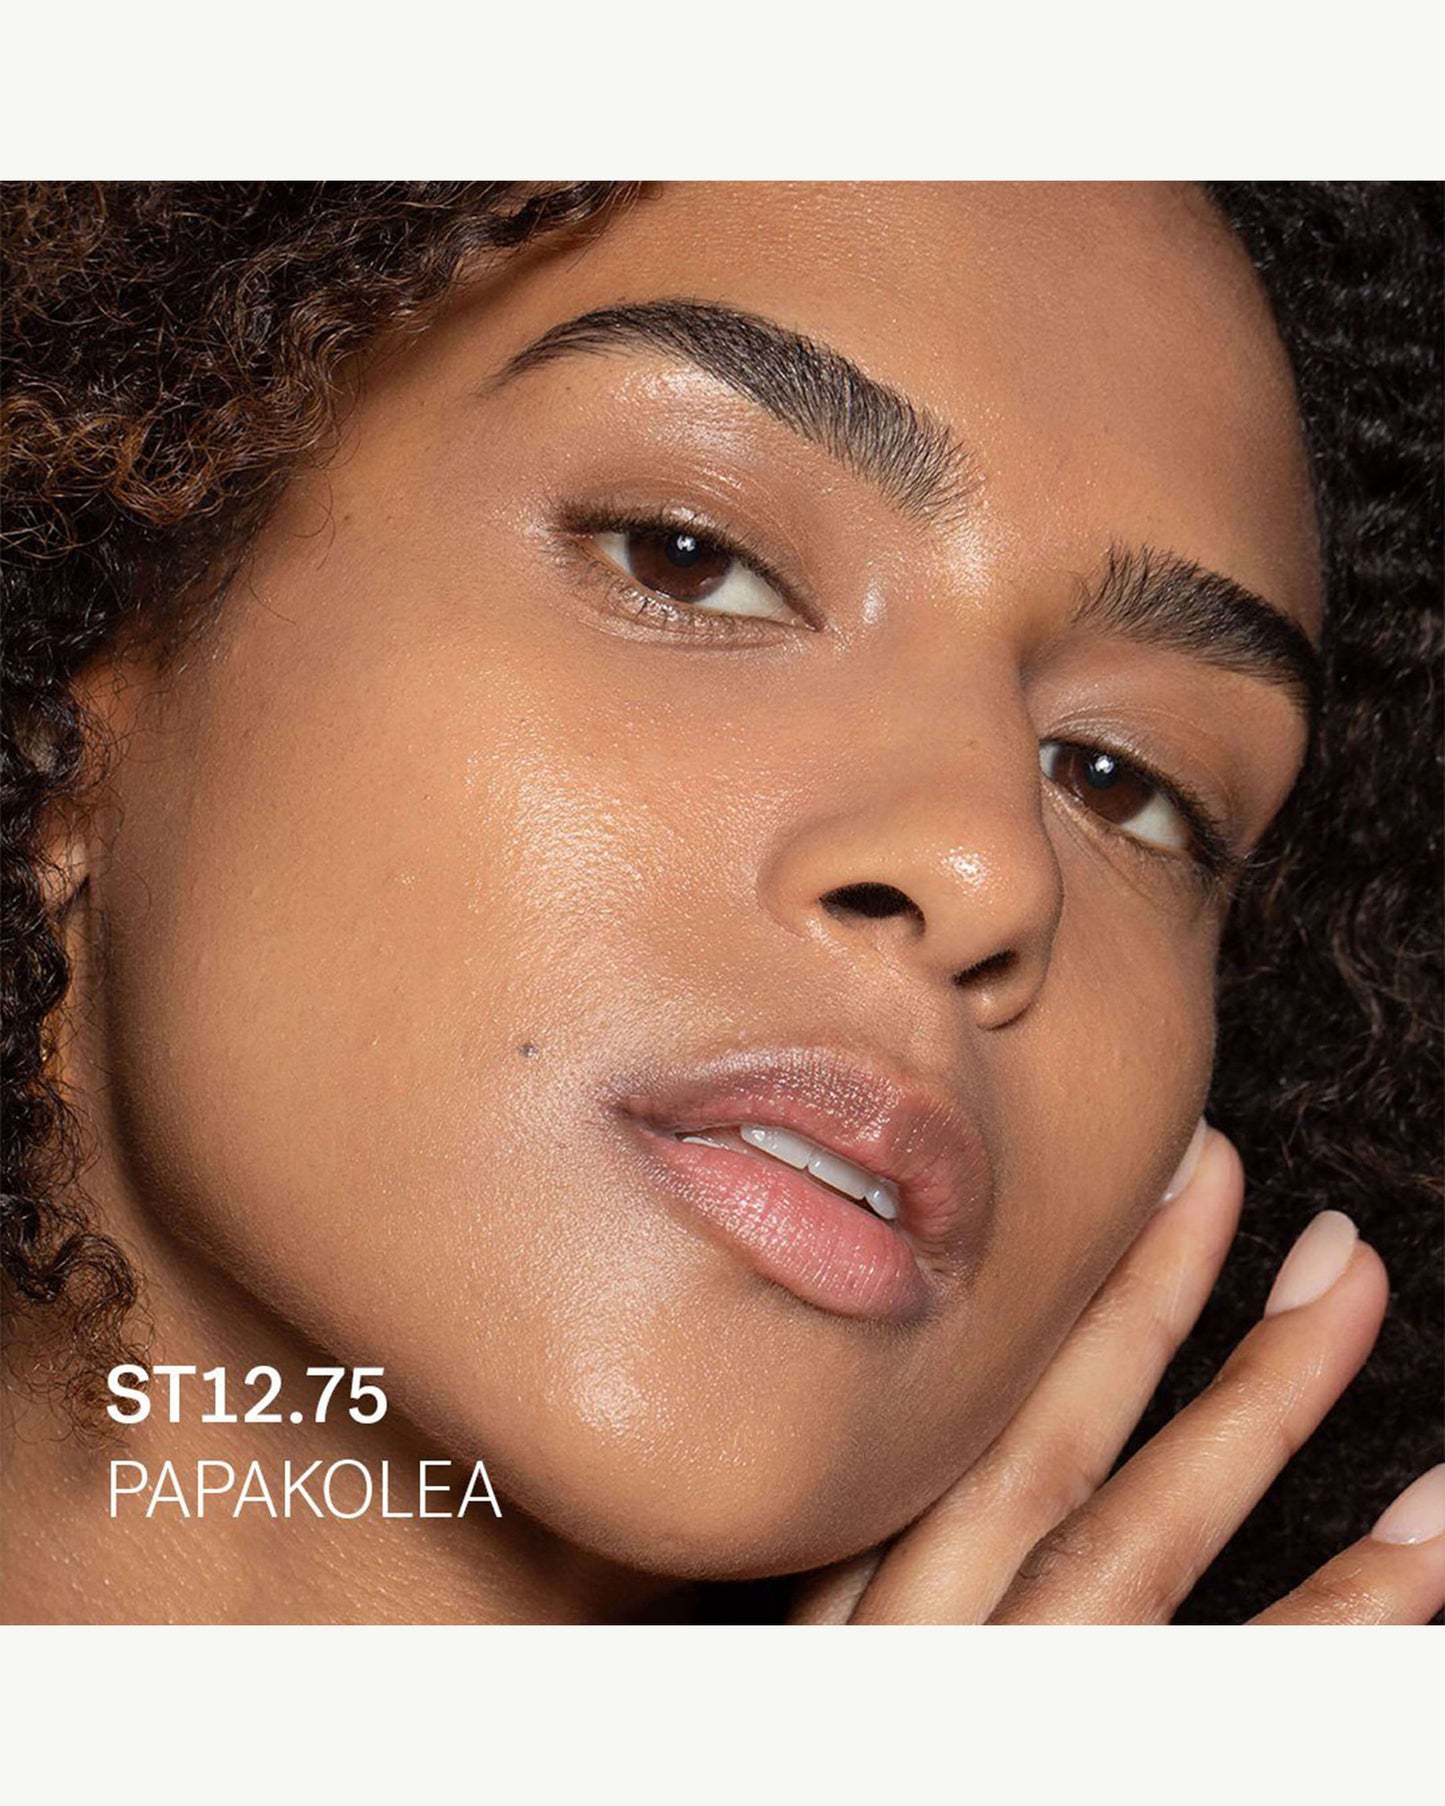  ST12.75 Papakolea (for tan skin with olive undertones)